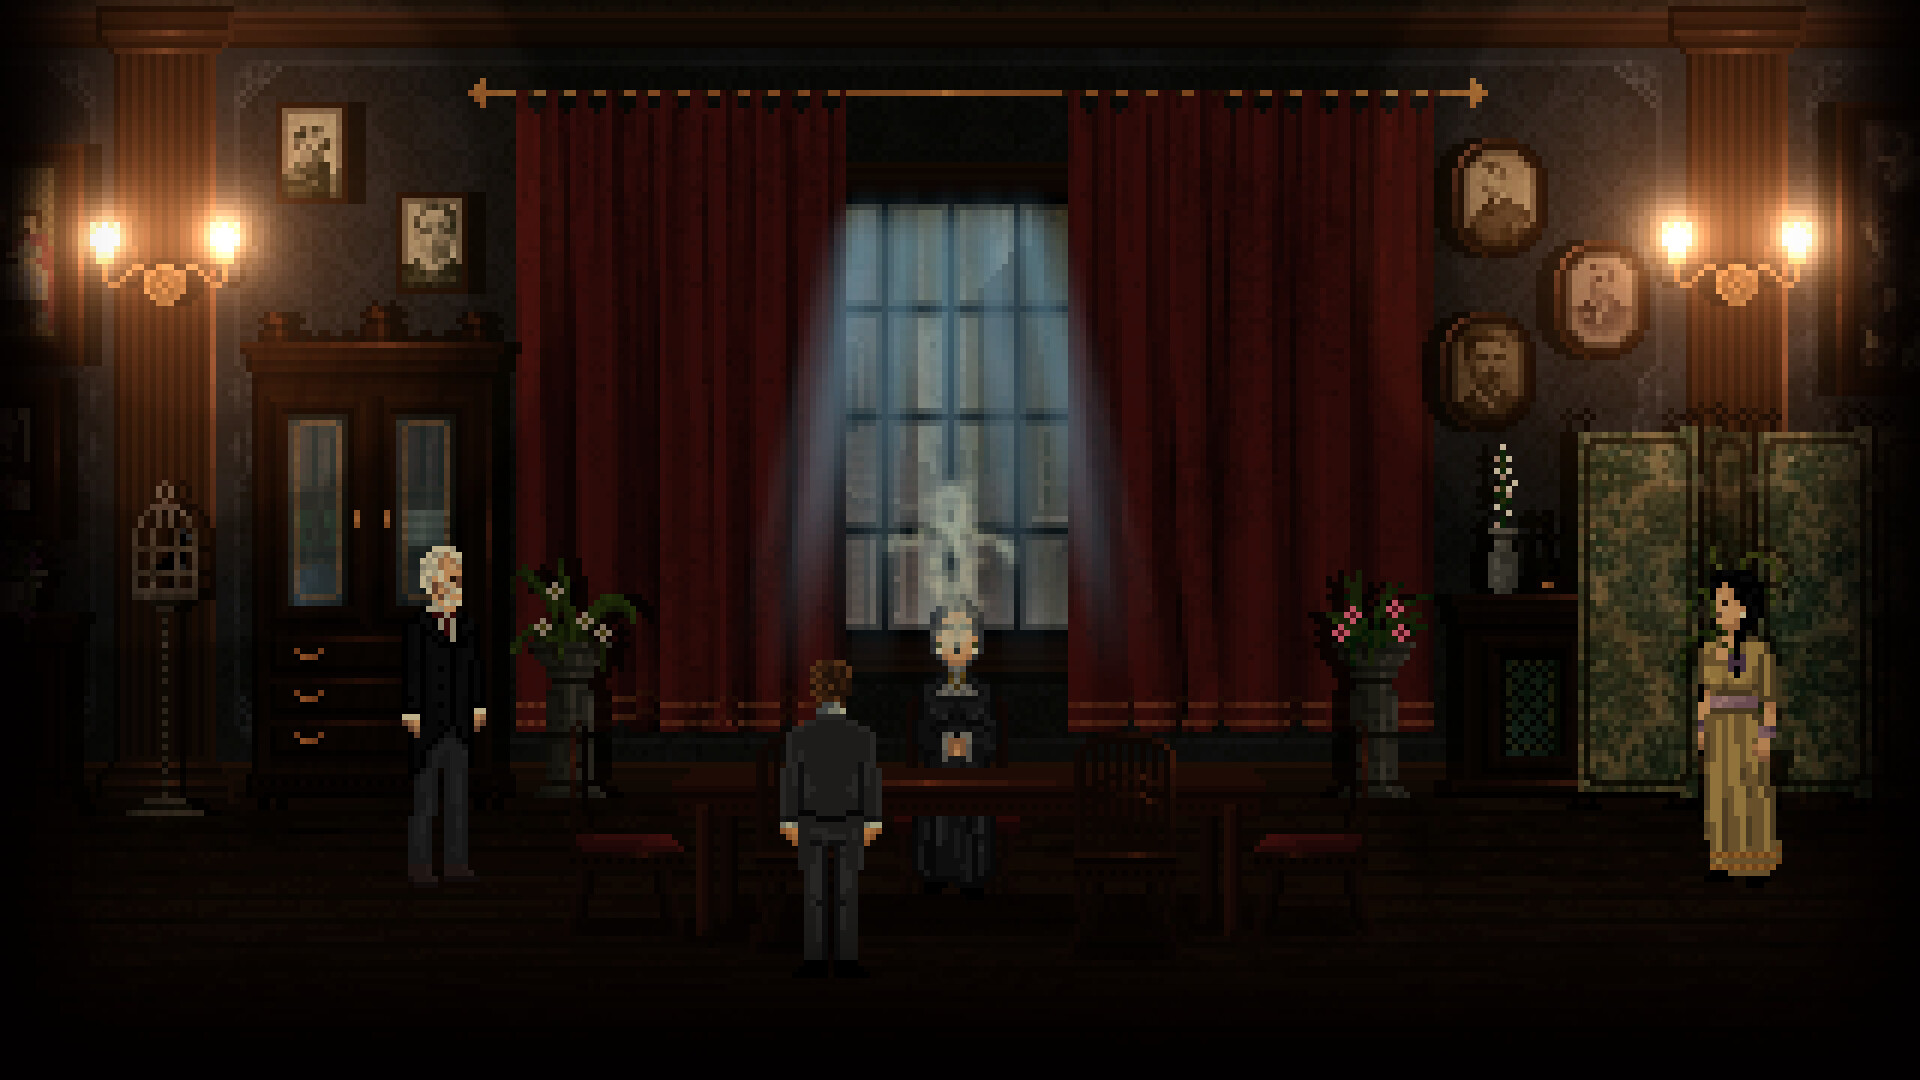 A screenshot from An English Haunting. It is done in a pixel art style. In a dark room with heavy red curtains, a woman sits behind a table with a spirit rising out of her. Watching are two men in suits and one woman in yellow dress.